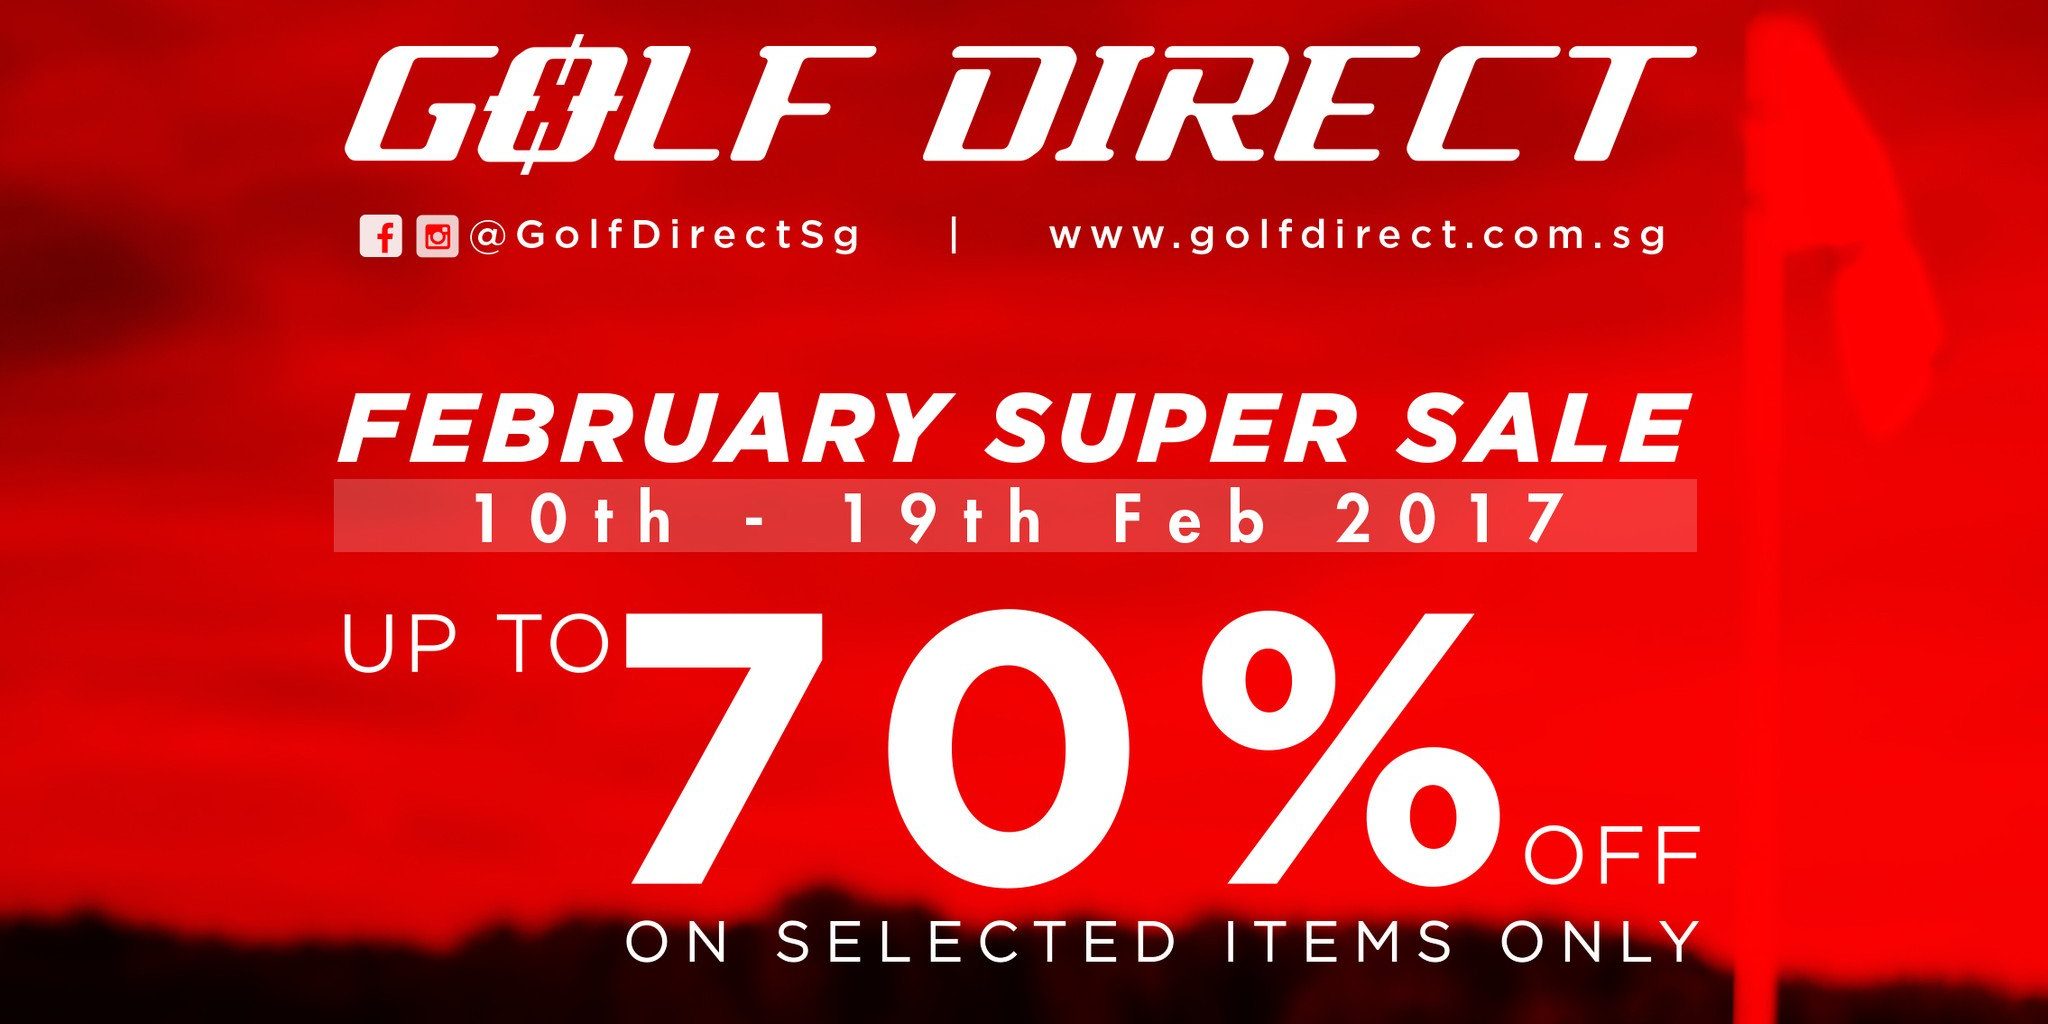 Golf Direct Singapore February Super Sale Up to 70% Off Promotion 10-19 Feb 2017